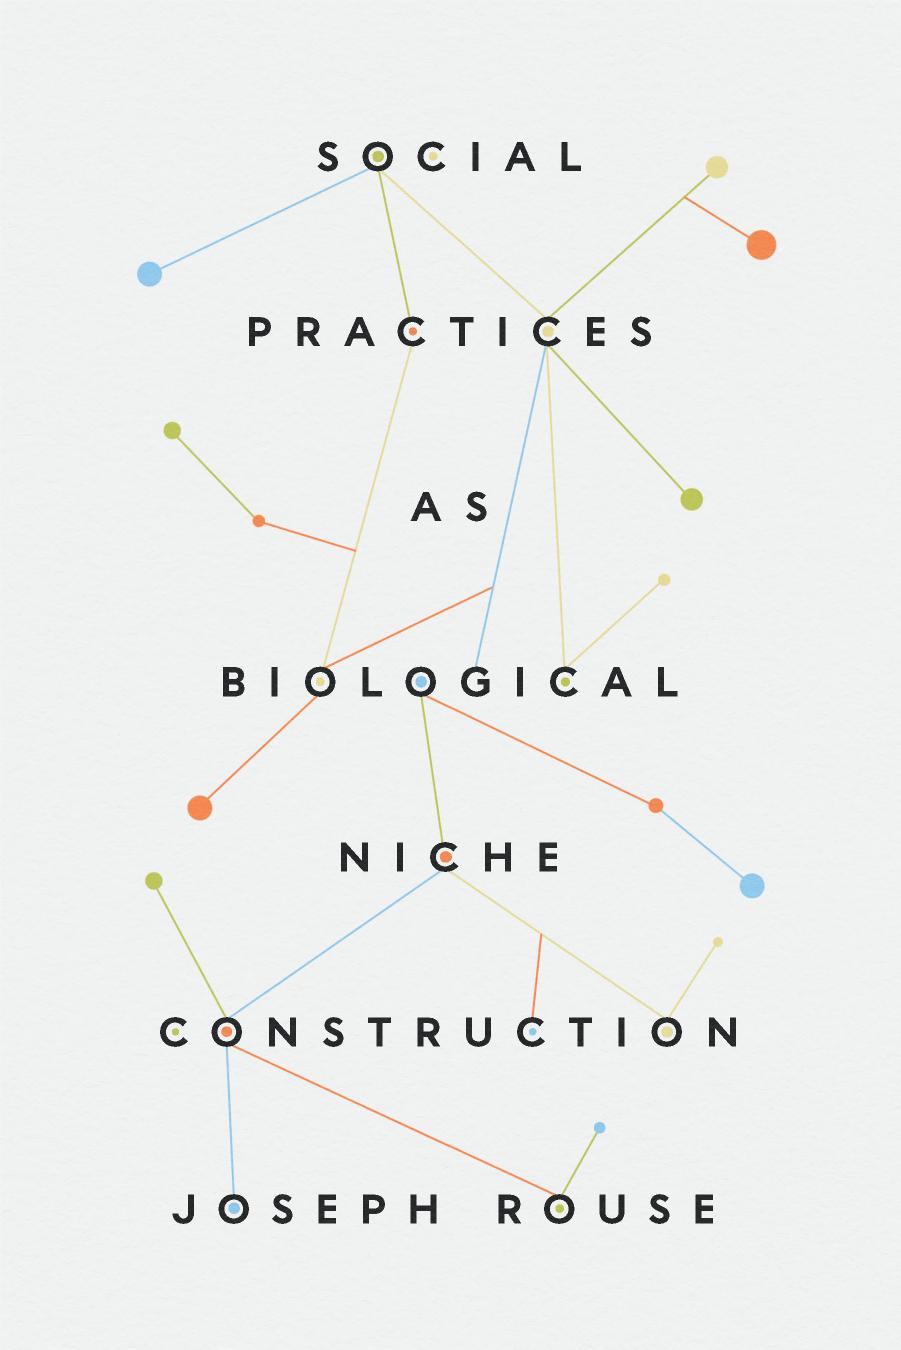 Social Practices as Biological Niche Construction by Joseph Rouse